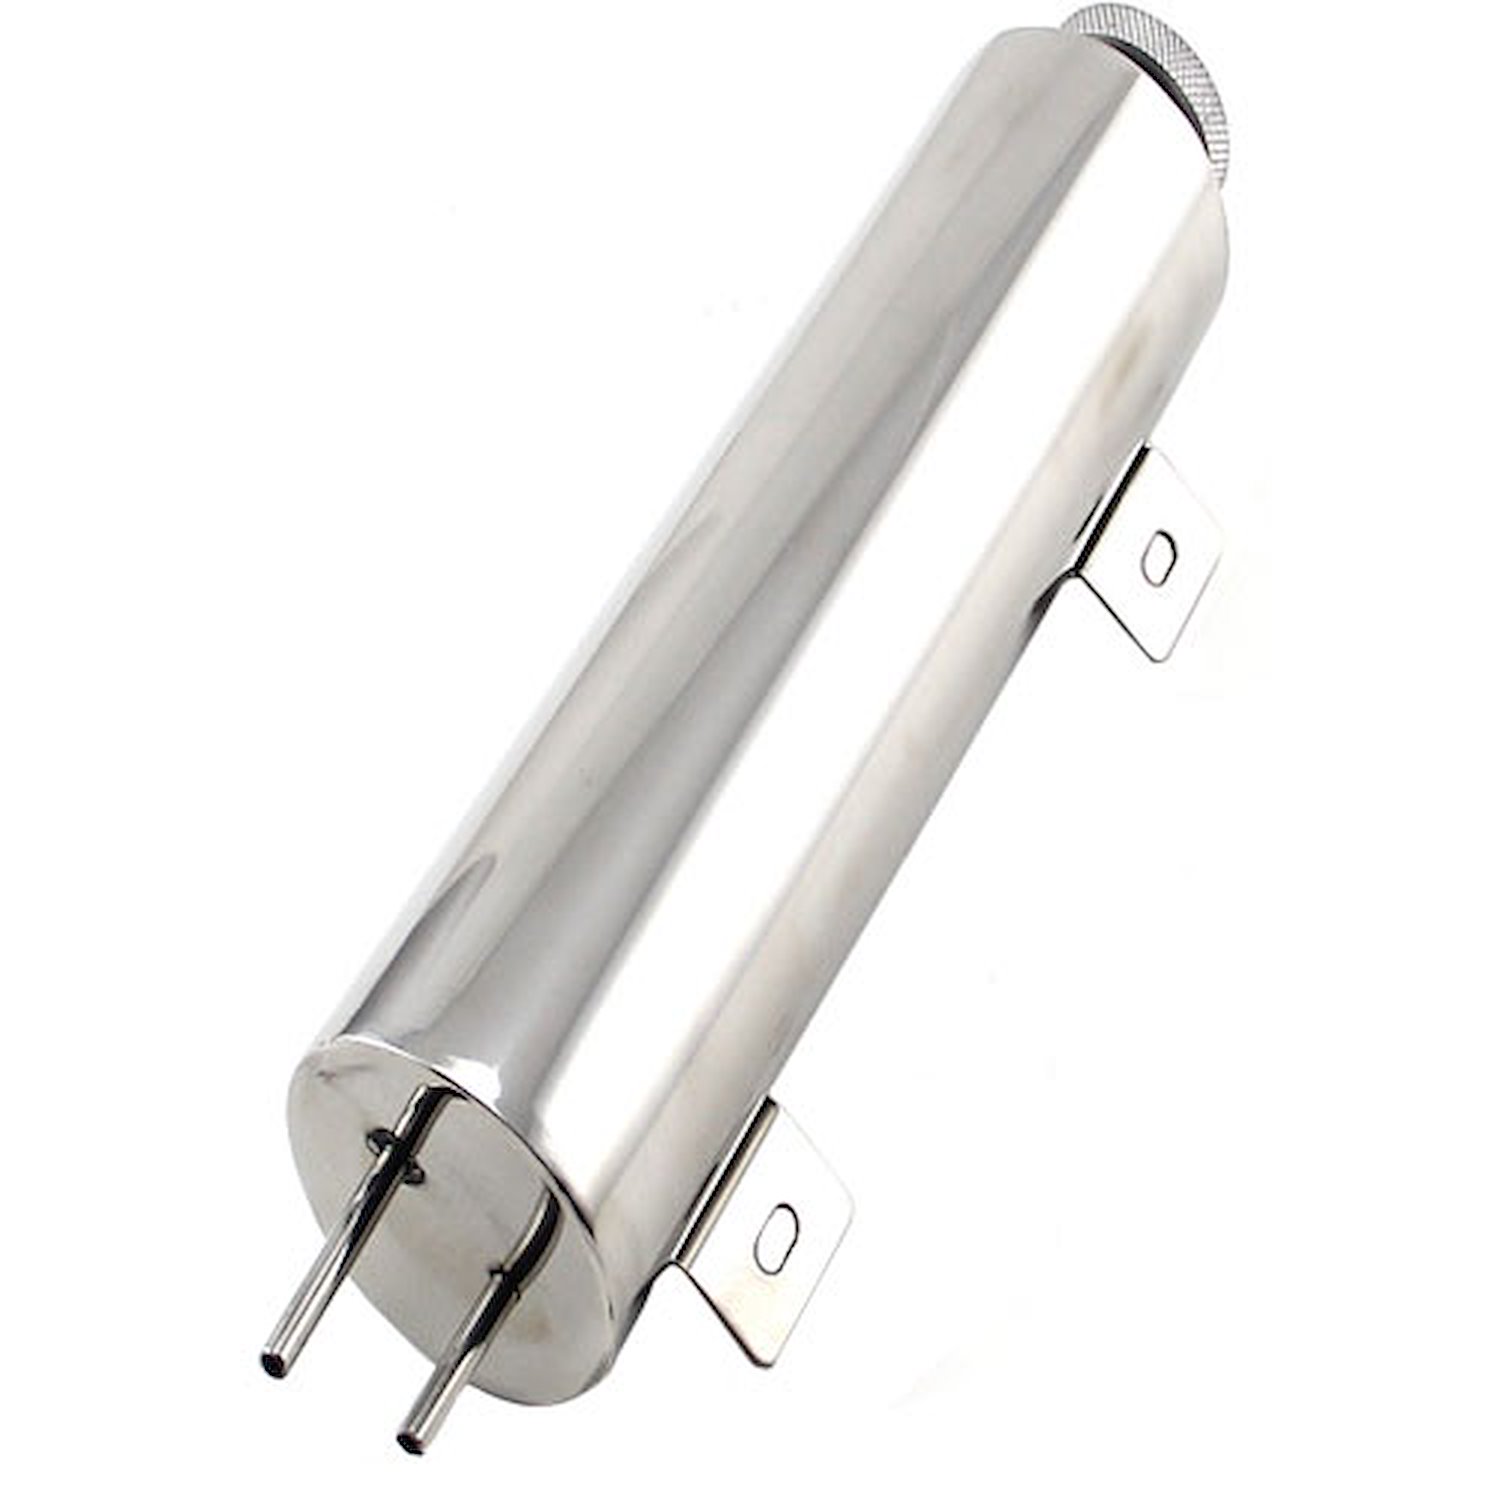 3 x 12 Stainless Steel Overflow Tank With Mounting Bracket Kit